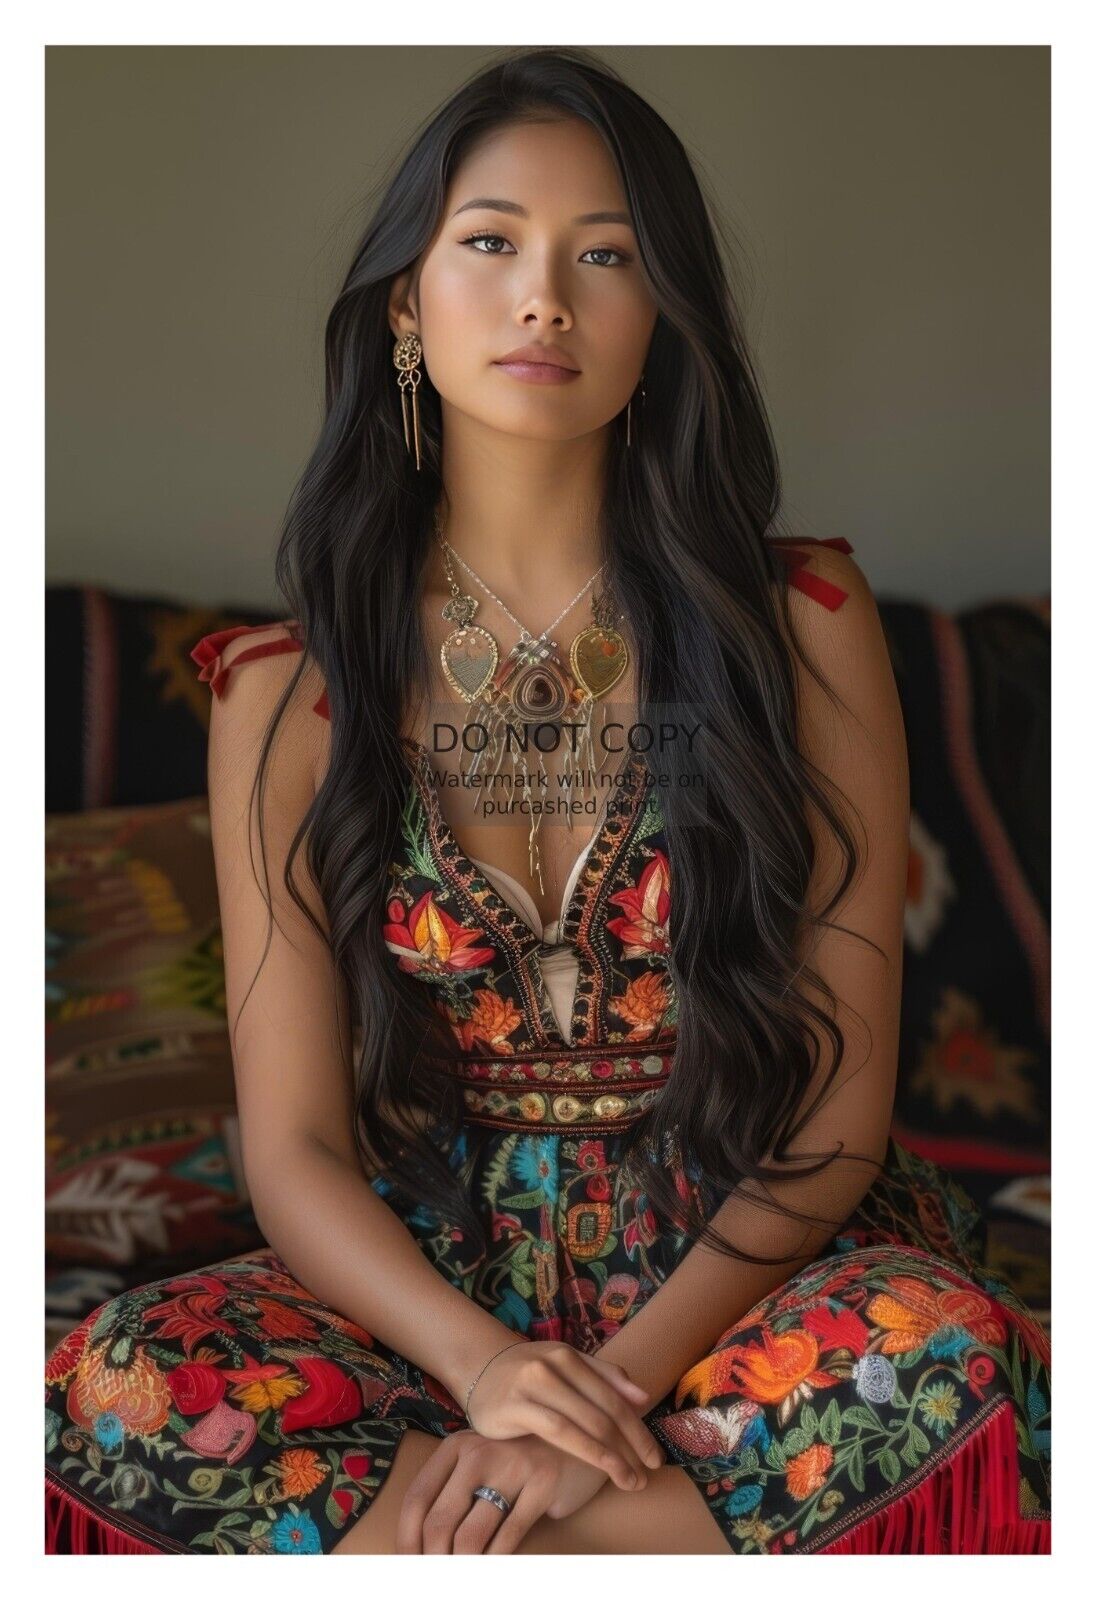 GORGEOUS YOUNG NATIVE AMERICAN LADY IN COLORFUL DRESS 4X6 FANTASY PHOTO